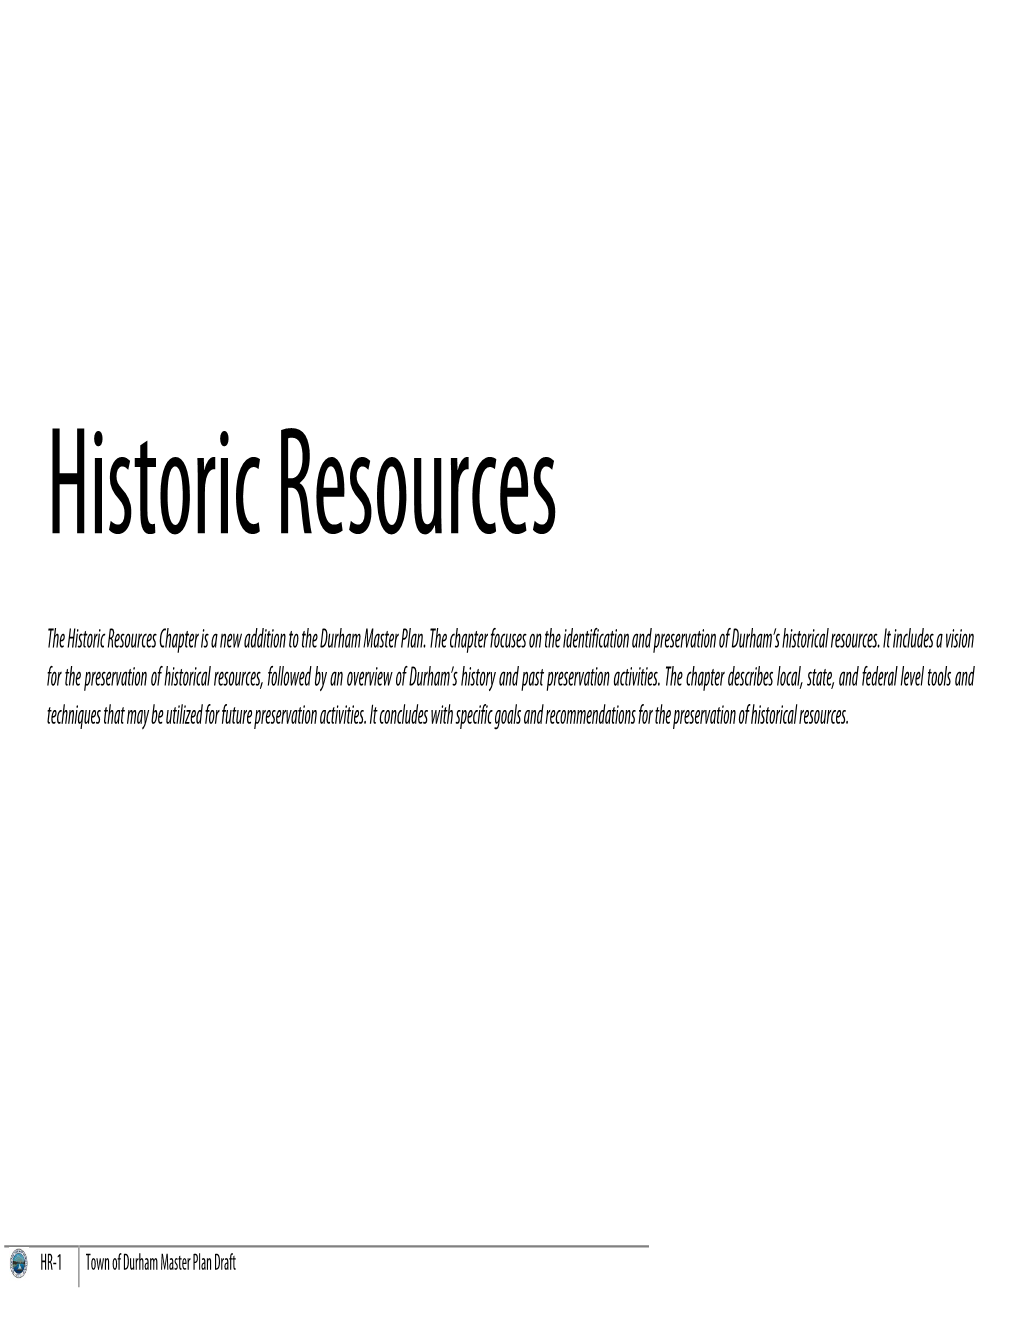 The Historic Resources Chapter Is a New Addition to the Durham Master Plan